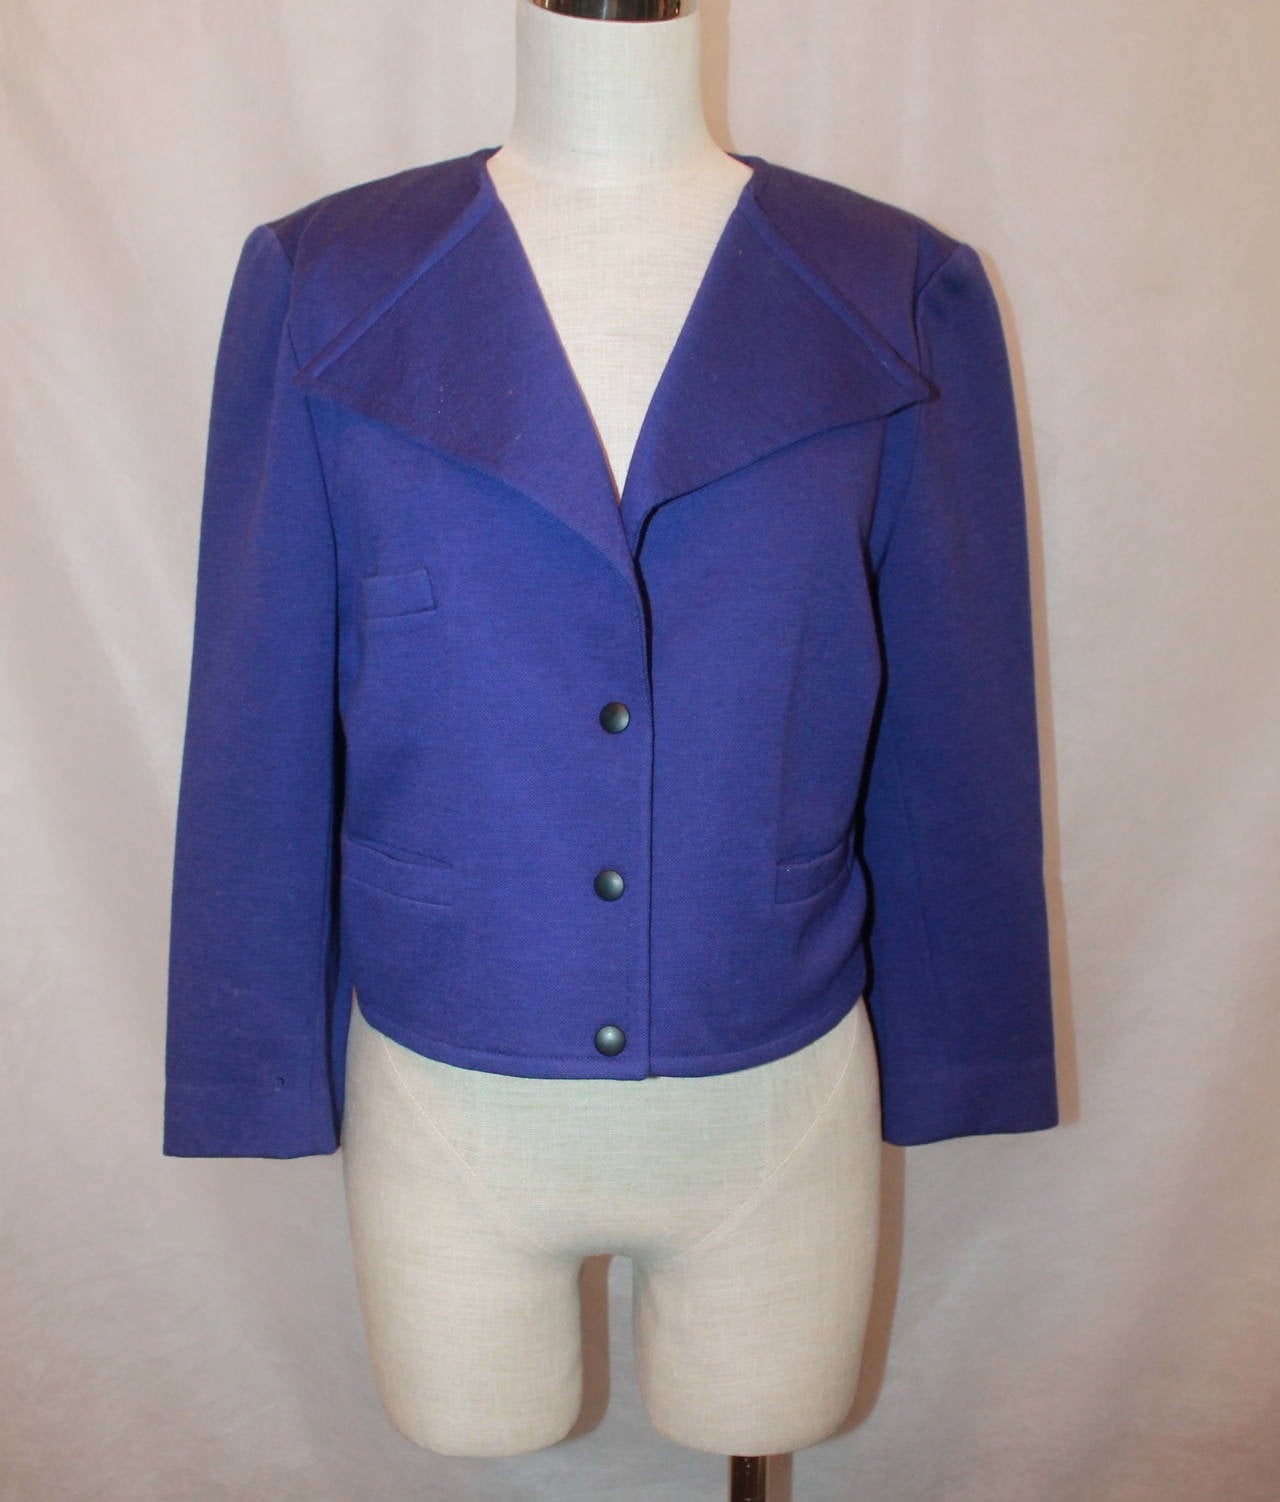 Sonia Rykiel 1980's Vintage Royal Purple Wool Jacket - M. This jacket is in excellent vintage condition with light use. It has a large collar and has 3 pockets. It also has snap buttons. 

Measurements:
Bust- up to 39